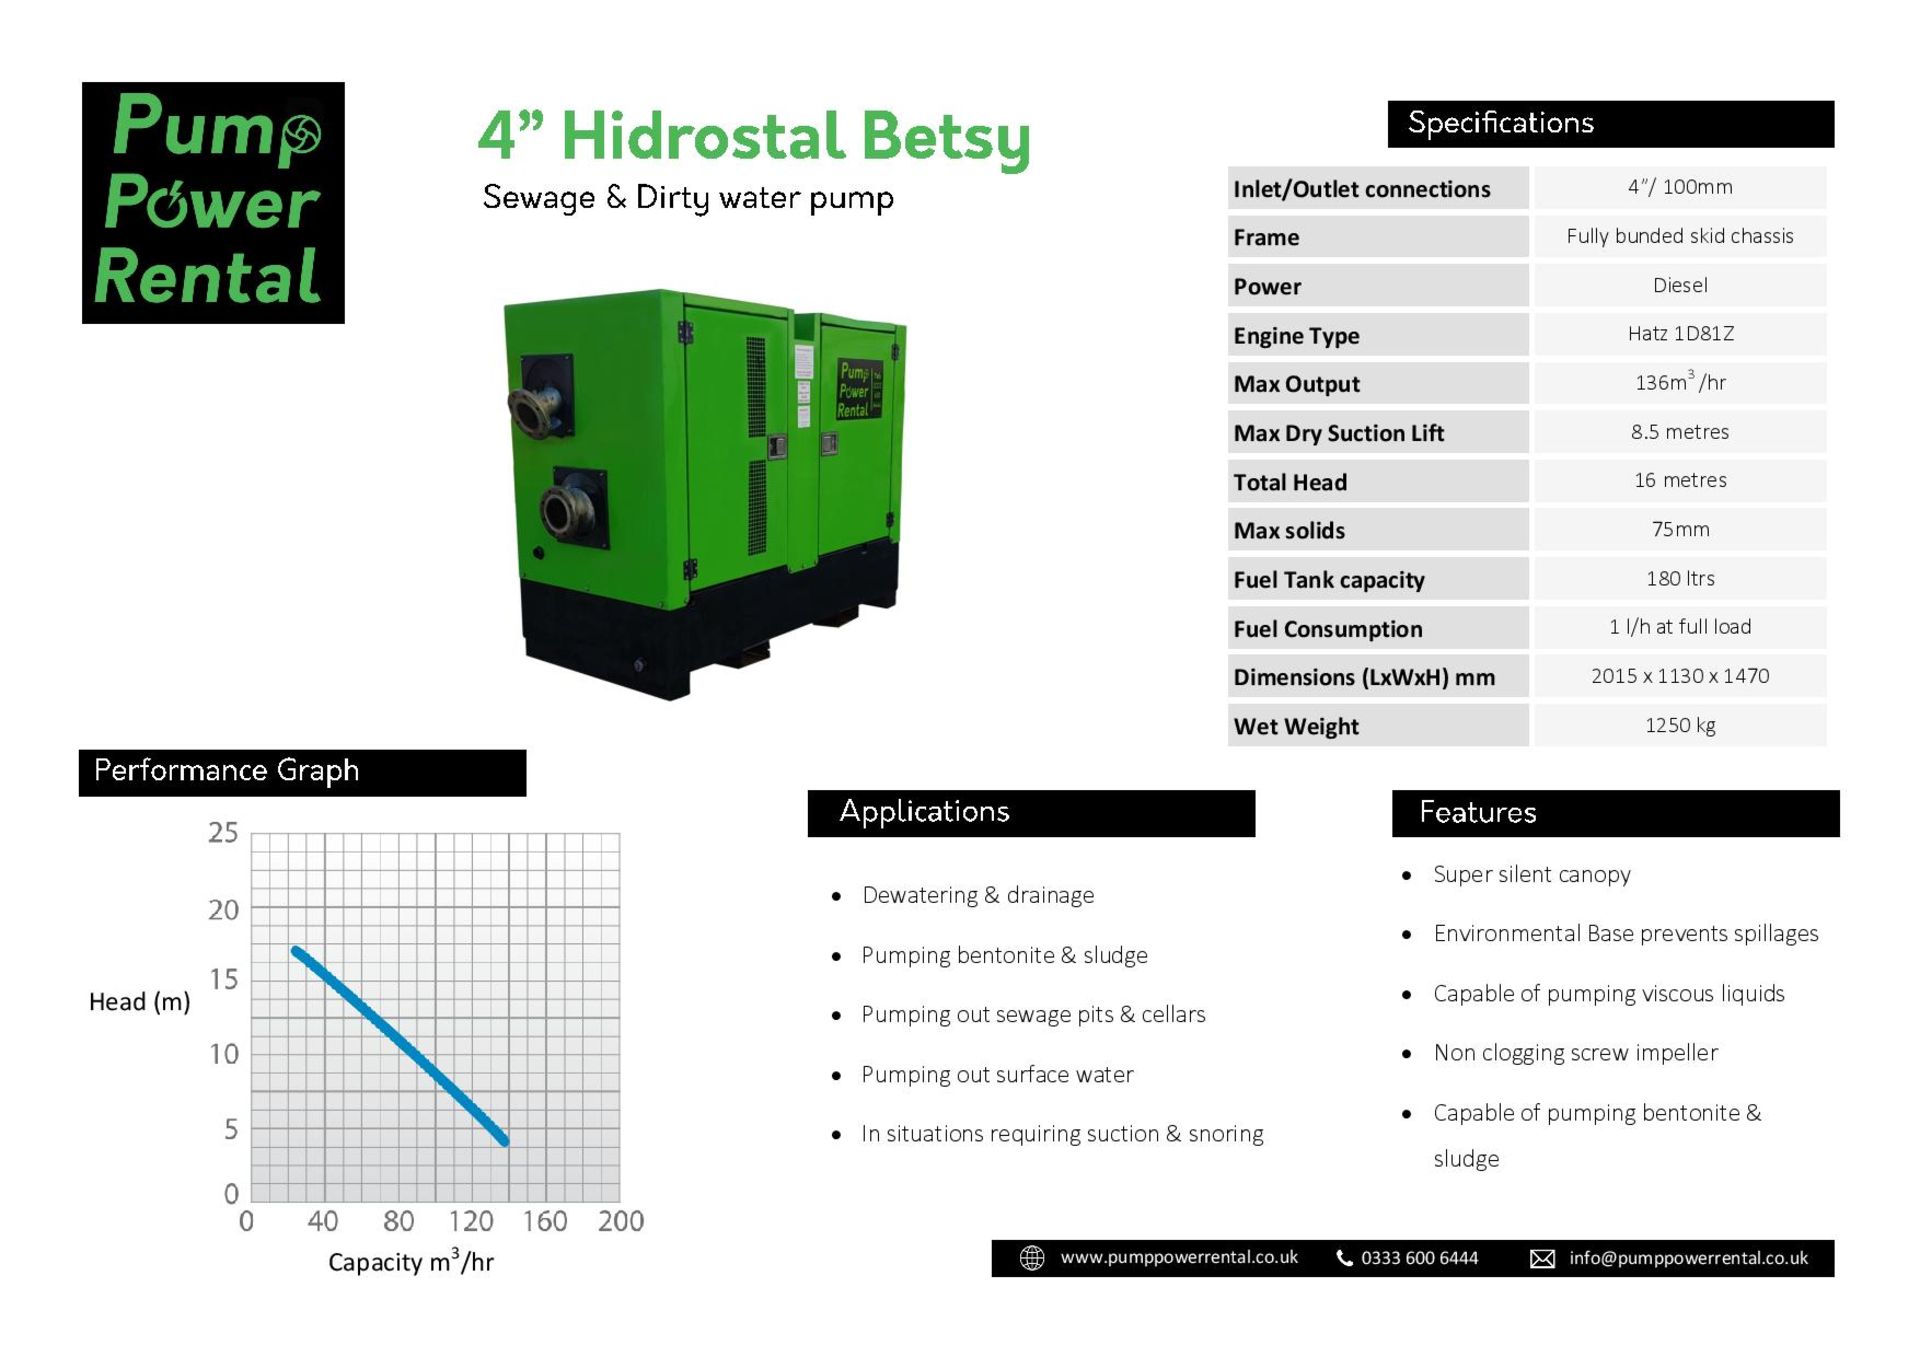 Hidrostal Betsy 4"" Sewage & Dirty Water Solids Handling Pump | Ref: A062 - Image 12 of 12